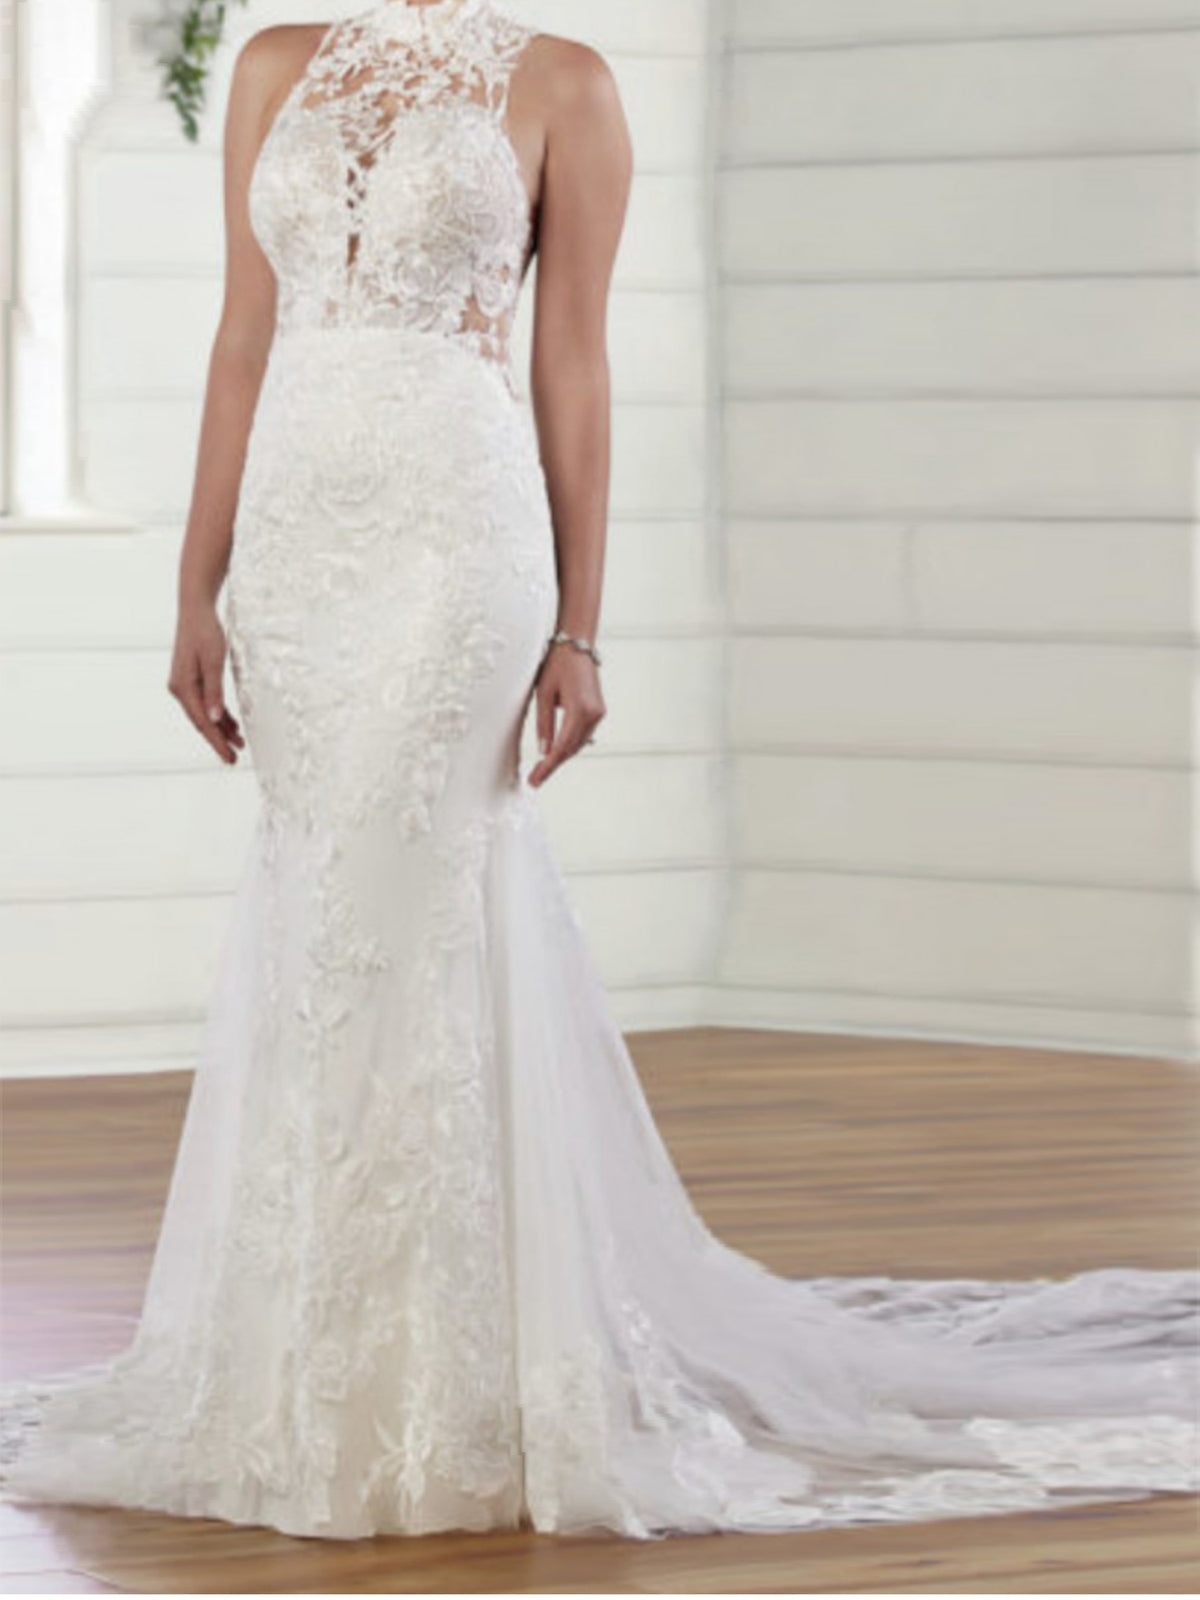 Halter Sleeveless Fit and Flare Wedding Dress With Lace